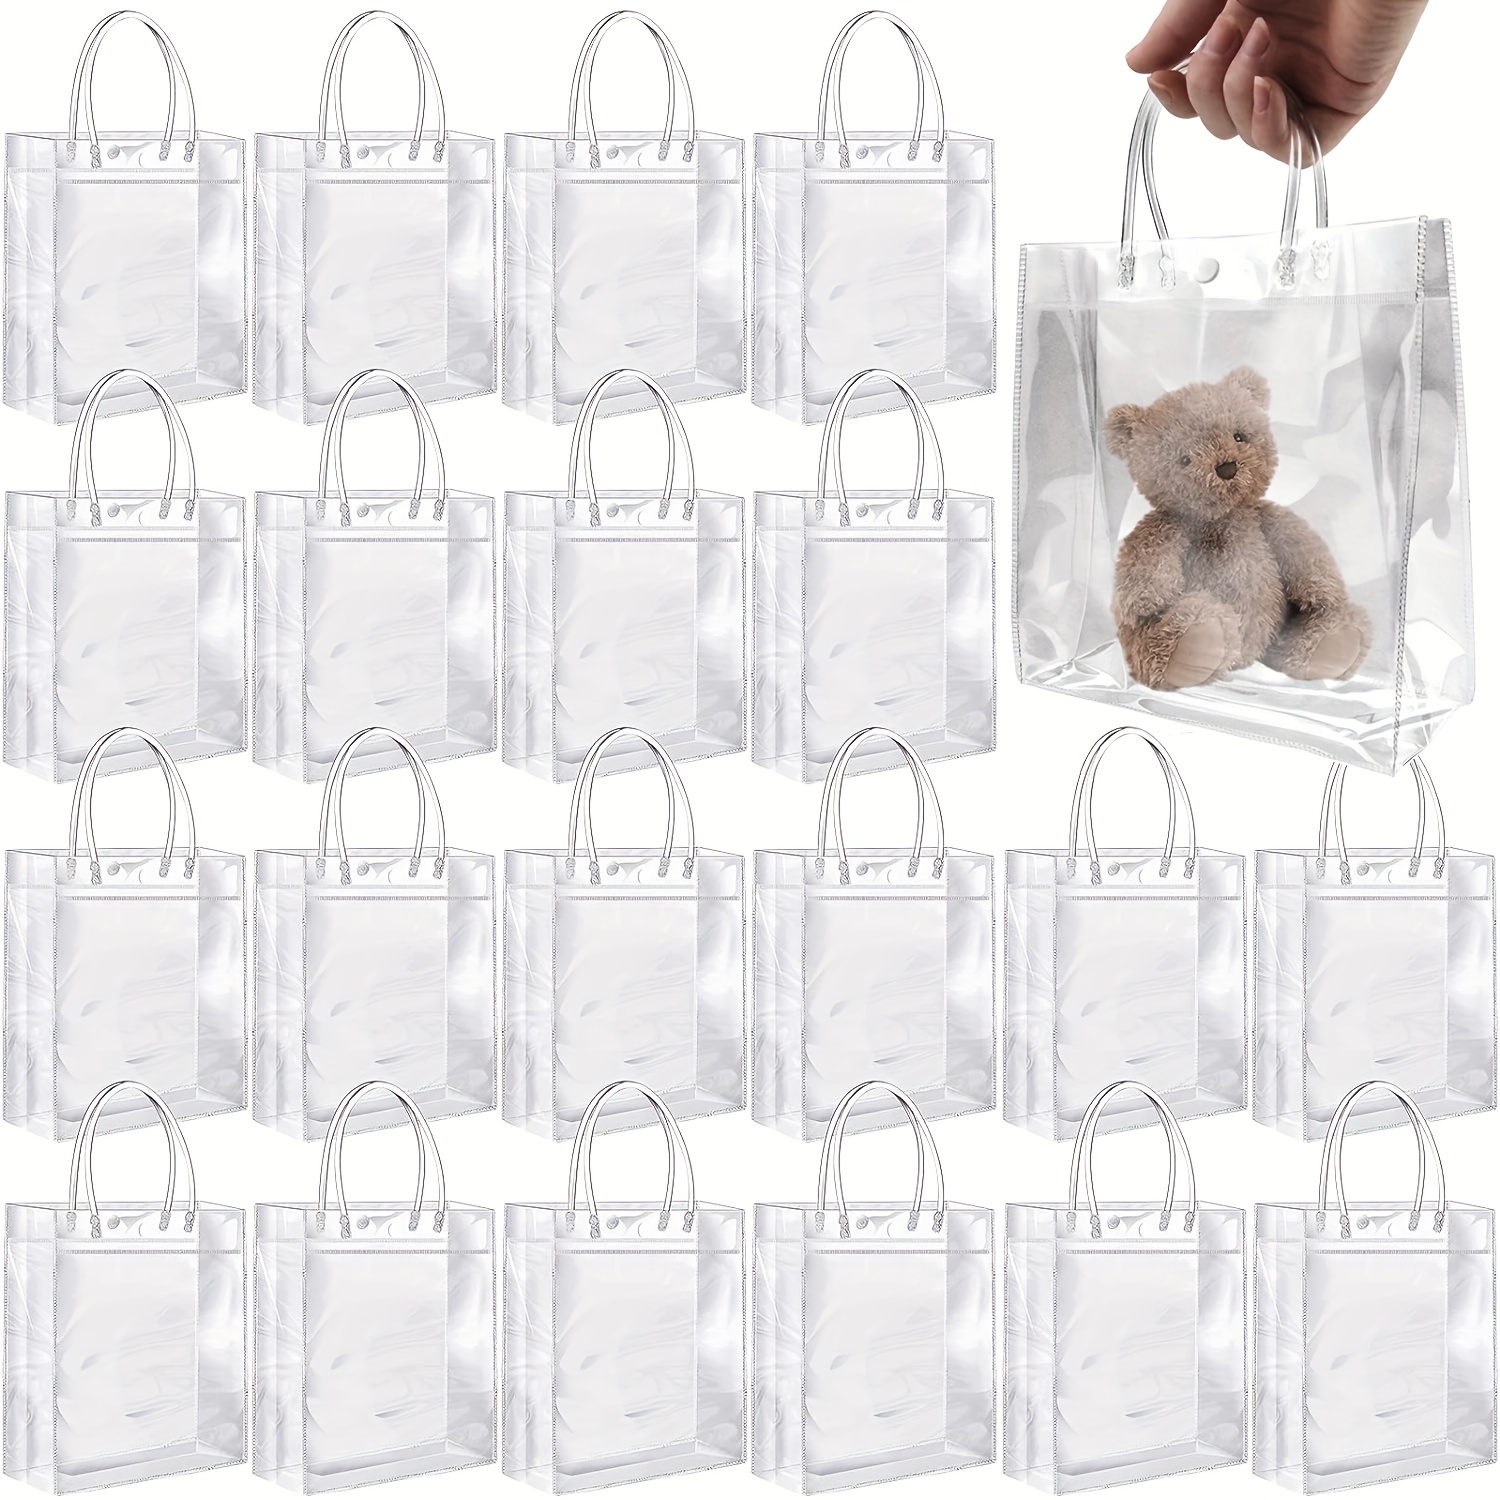 

20pcs, Clear Plastic Gift Bags With Handle, Reusable Pvc Plastic Gift Wrap Tote Bag For Halloween Christmas Boutique Wedding Birthday Party Favors (7.87" X 7.87" X 3.15")